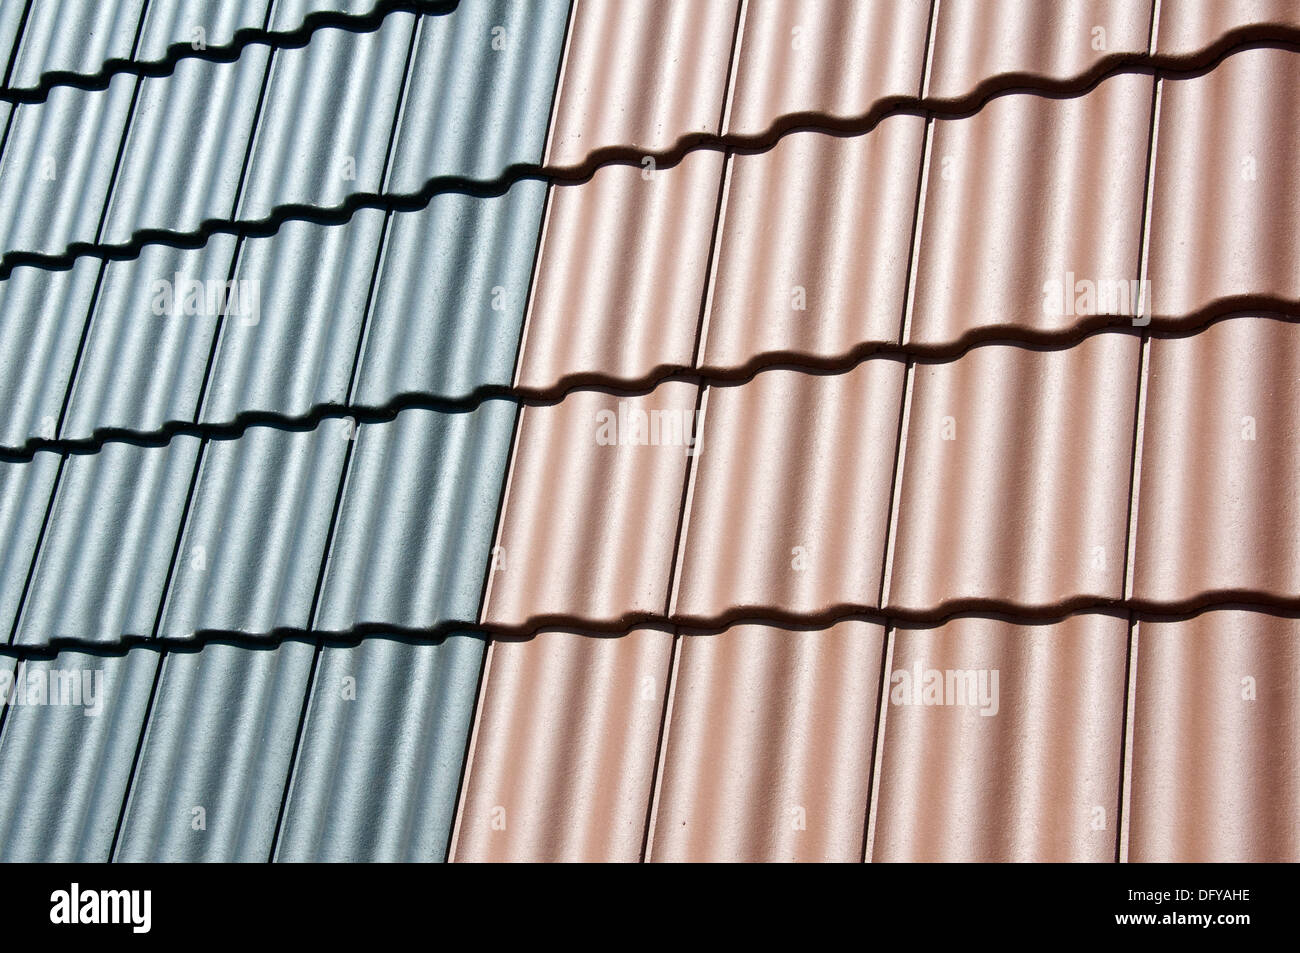 Roof tiles background Stock Photo